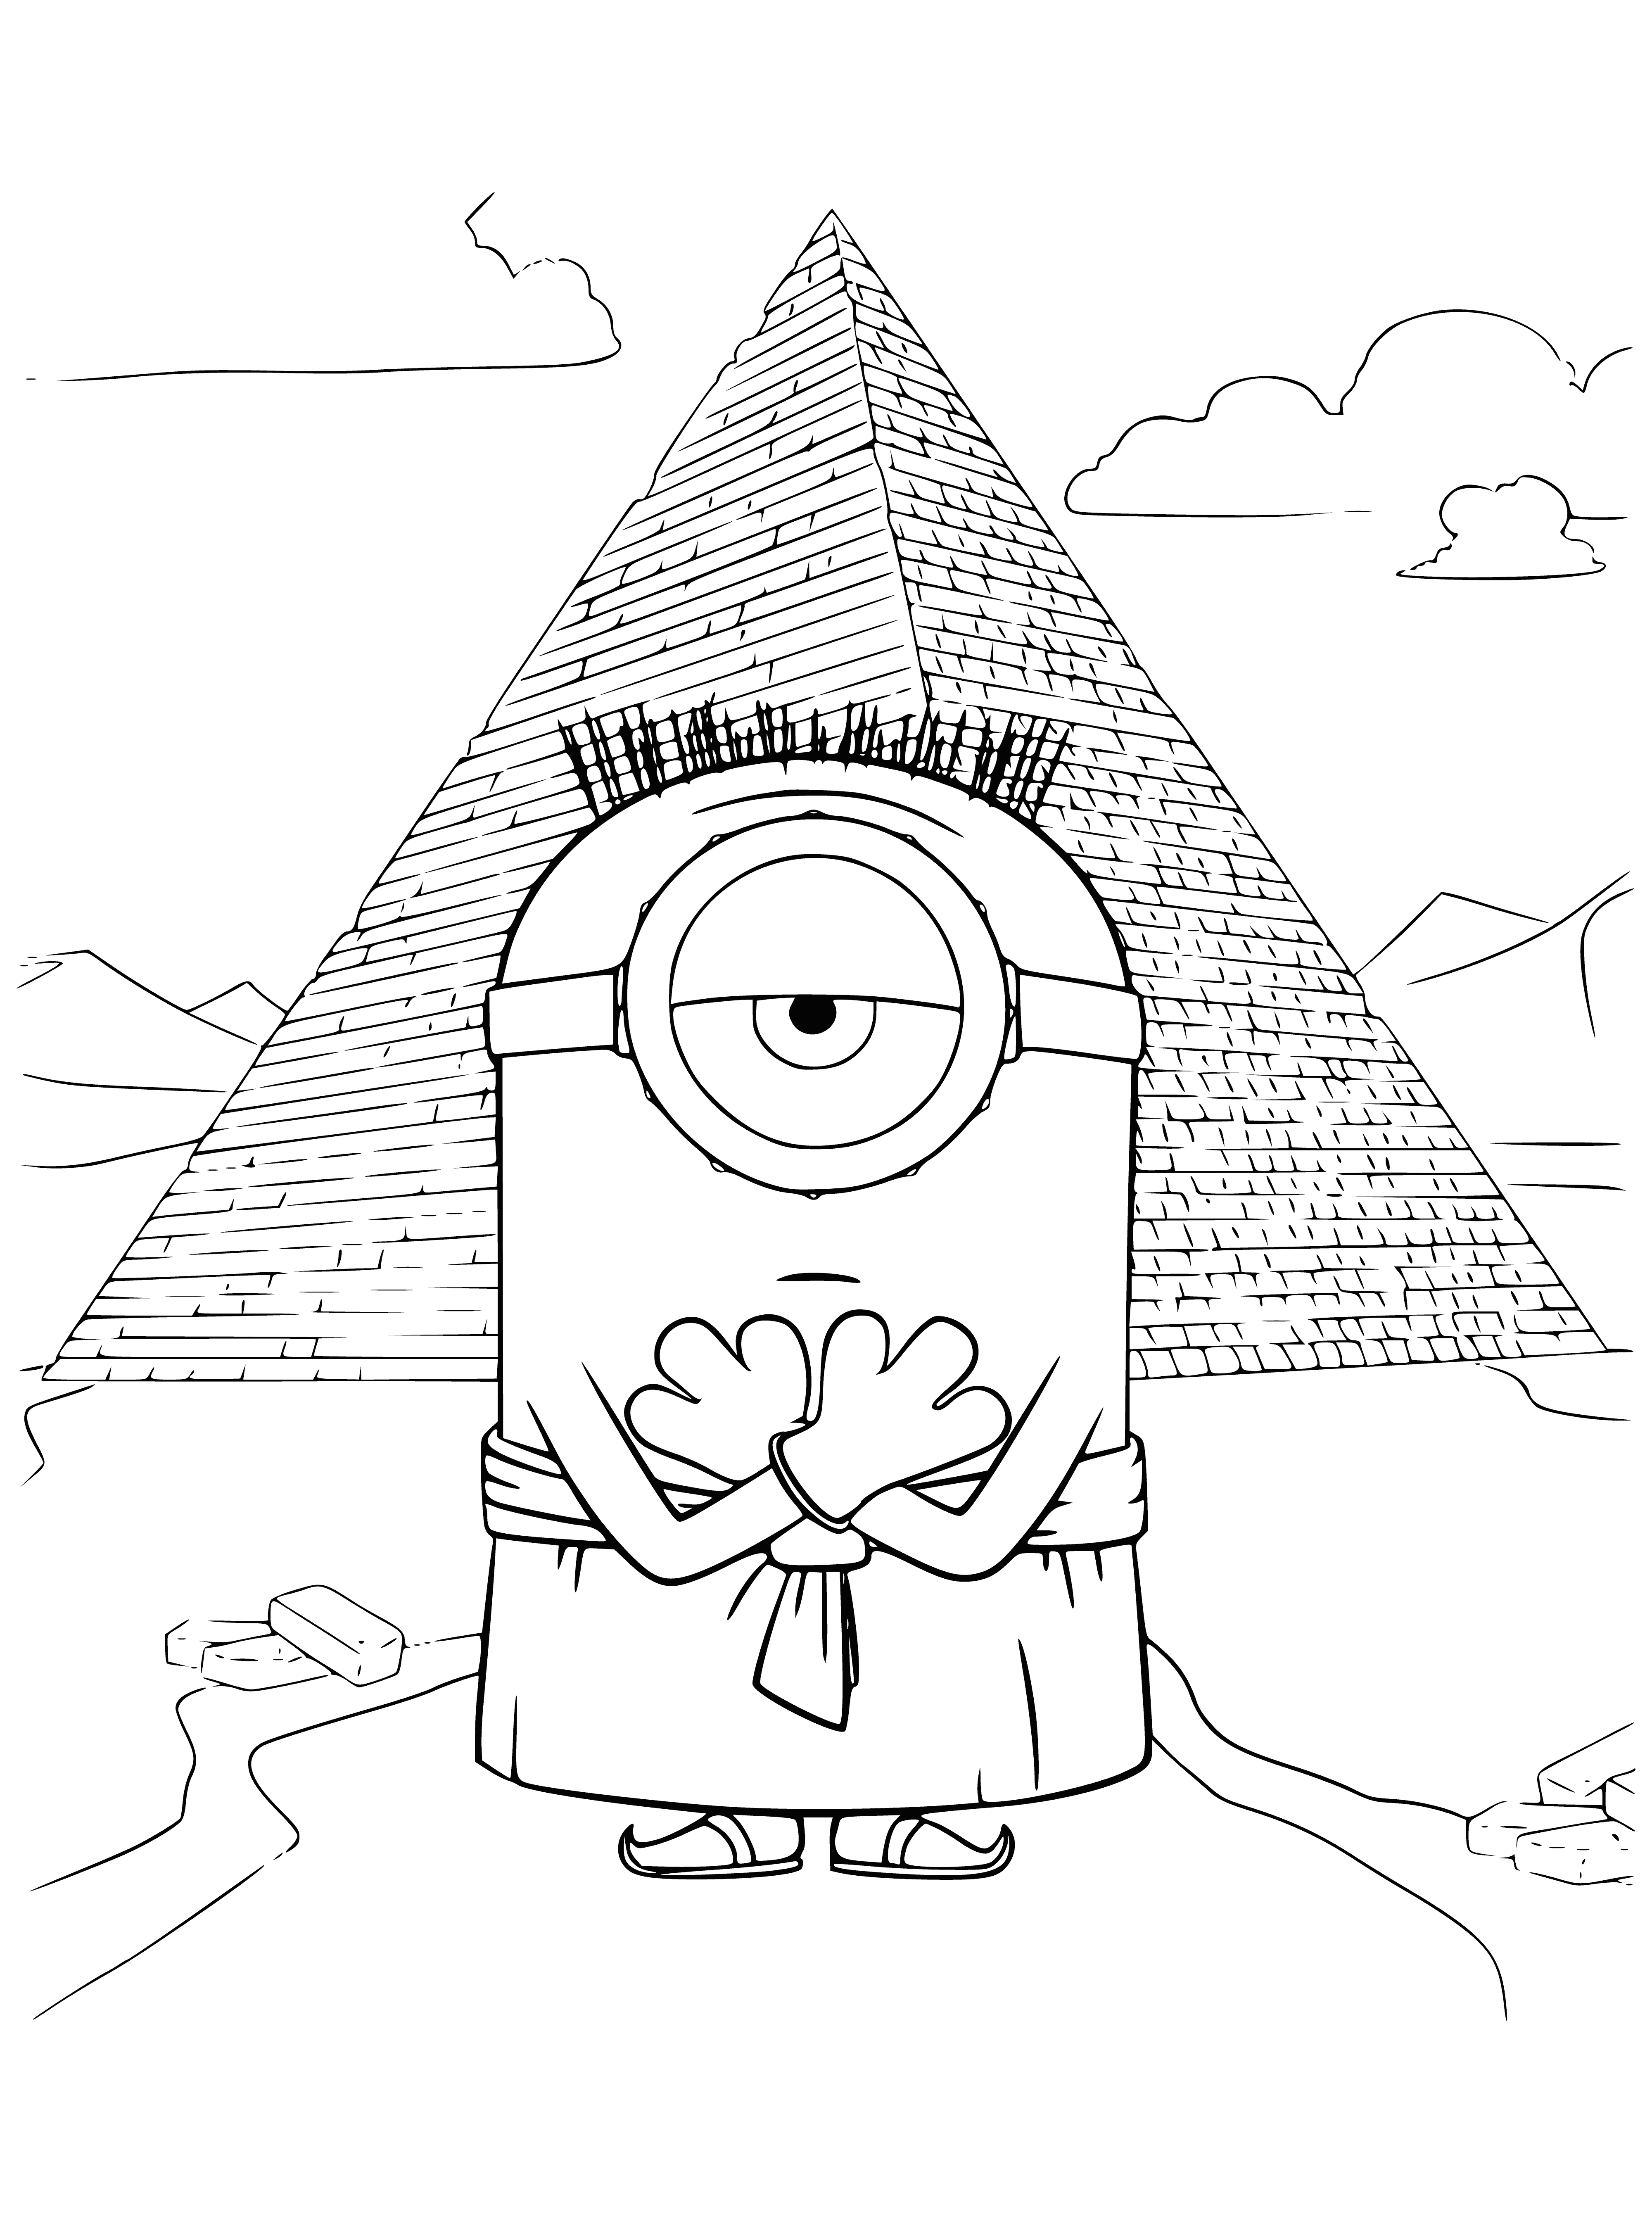 Mignon-Egyptian coloring page